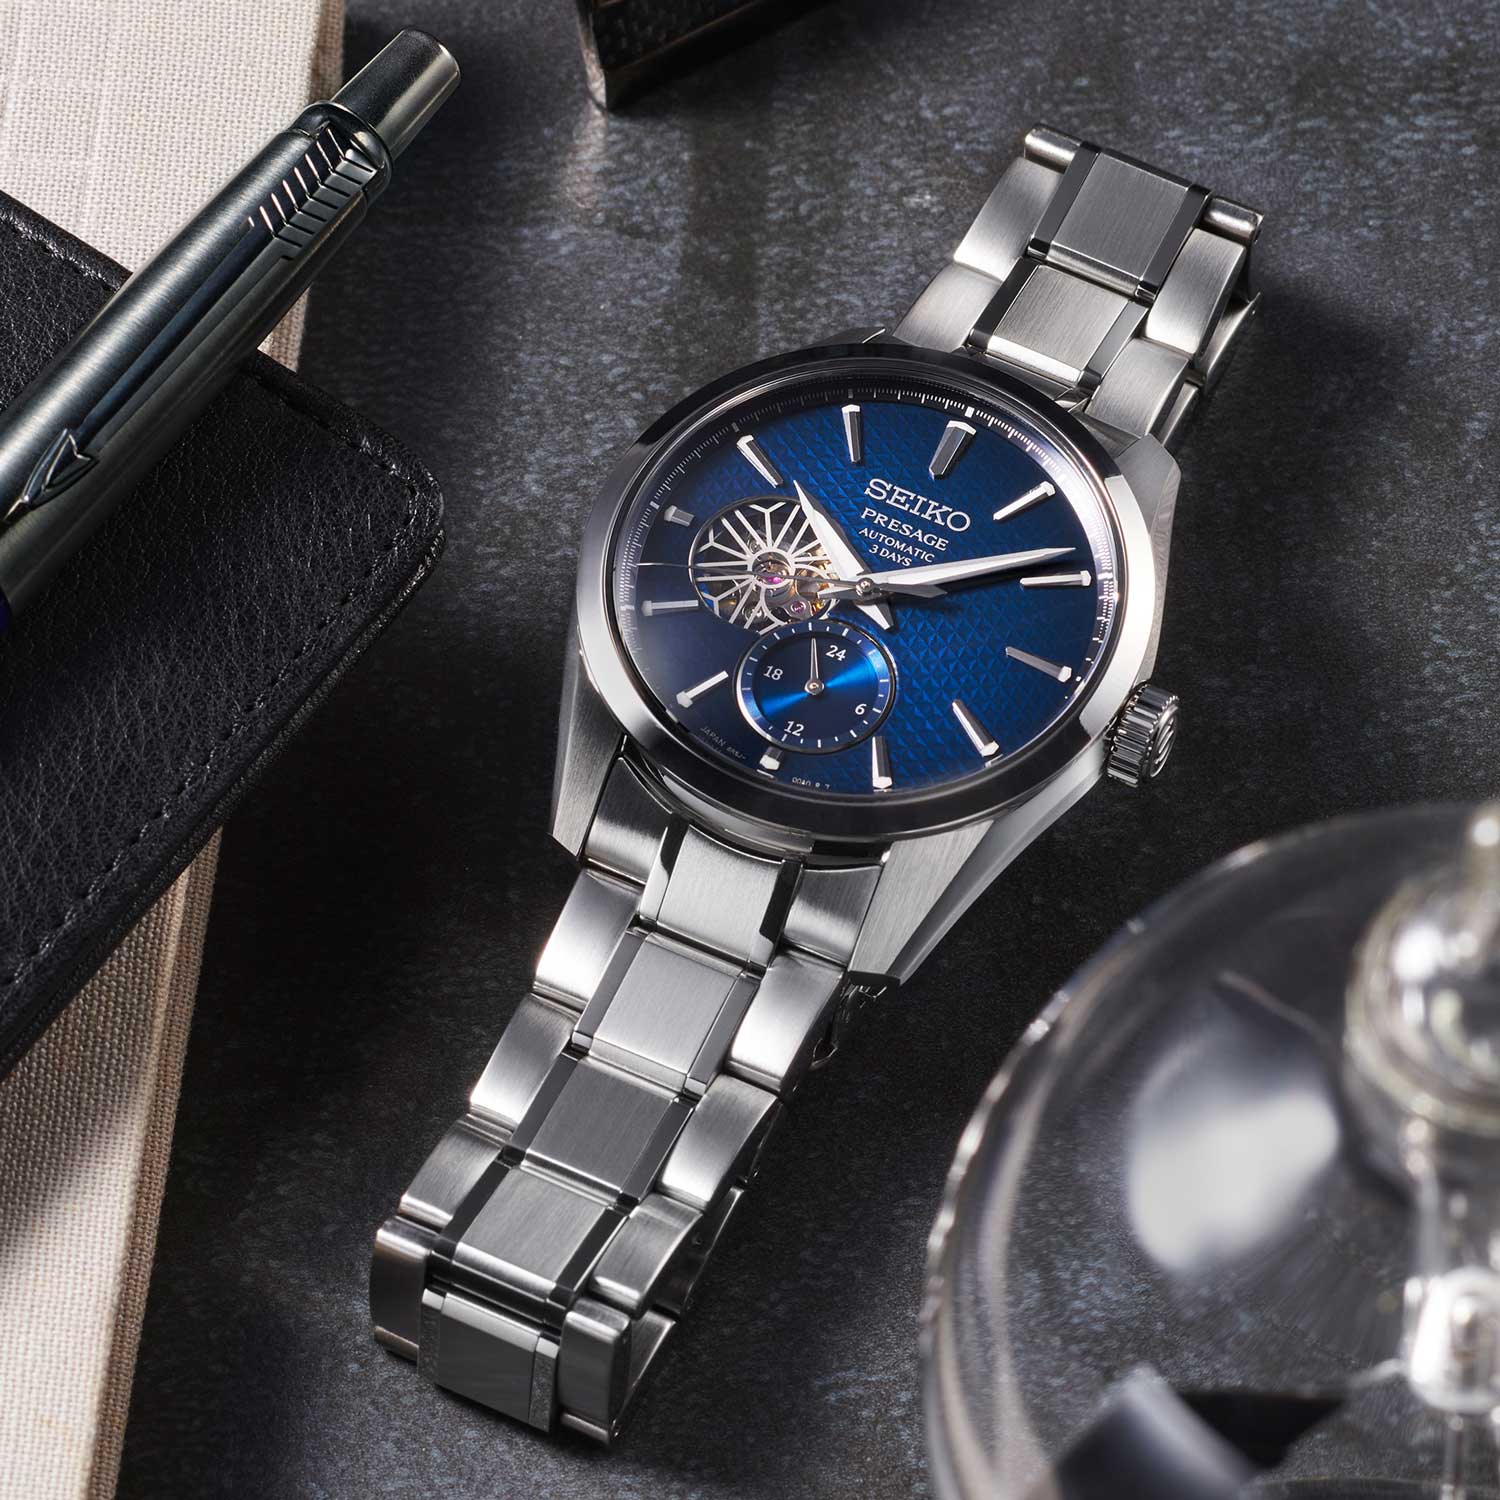 The latest models feature not only a revised opening but also new hour markers, reminiscent of those found in the Grand Seiko "Thin Dress" series. Additionally, a new seconds hand has been introduced, with a counterweight shaped similarly to the hour markers.